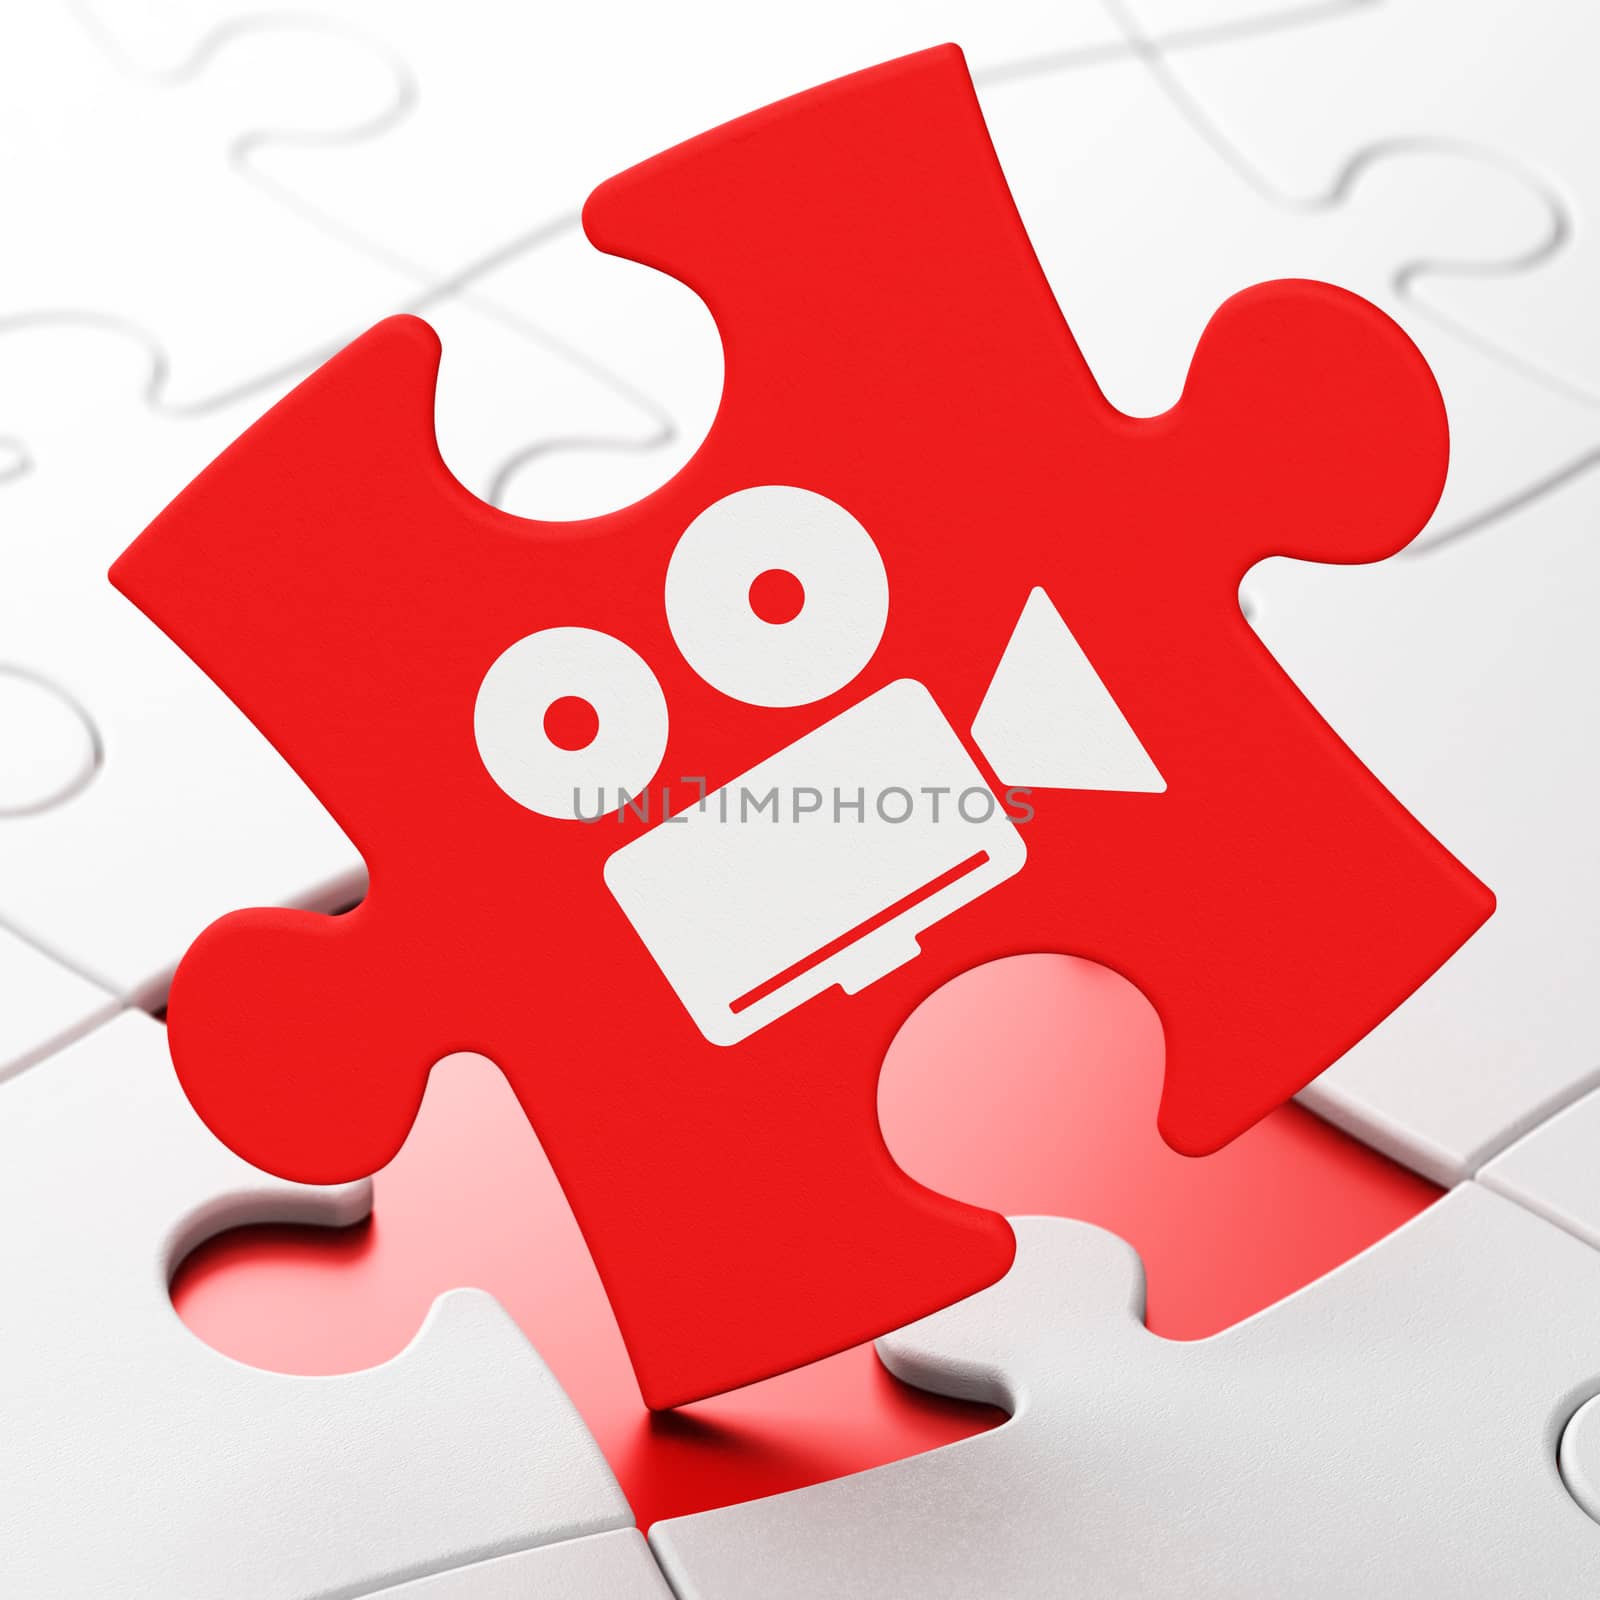 Tourism concept: Camera on Red puzzle pieces background, 3D rendering